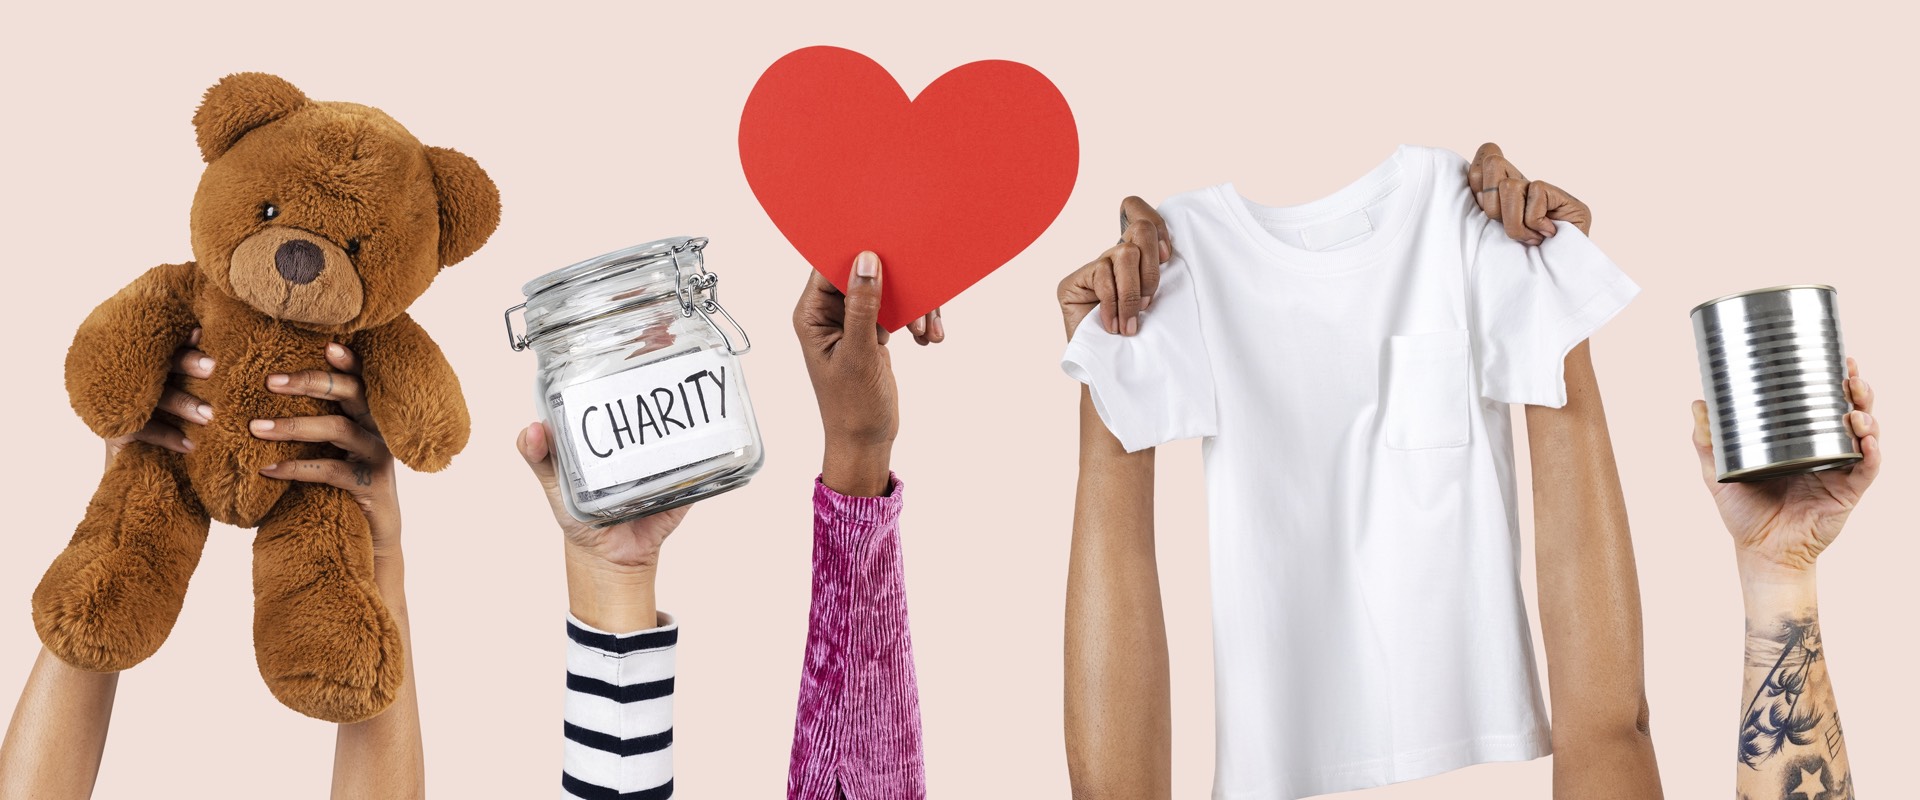 Top 5 charities to donate your clothes in London